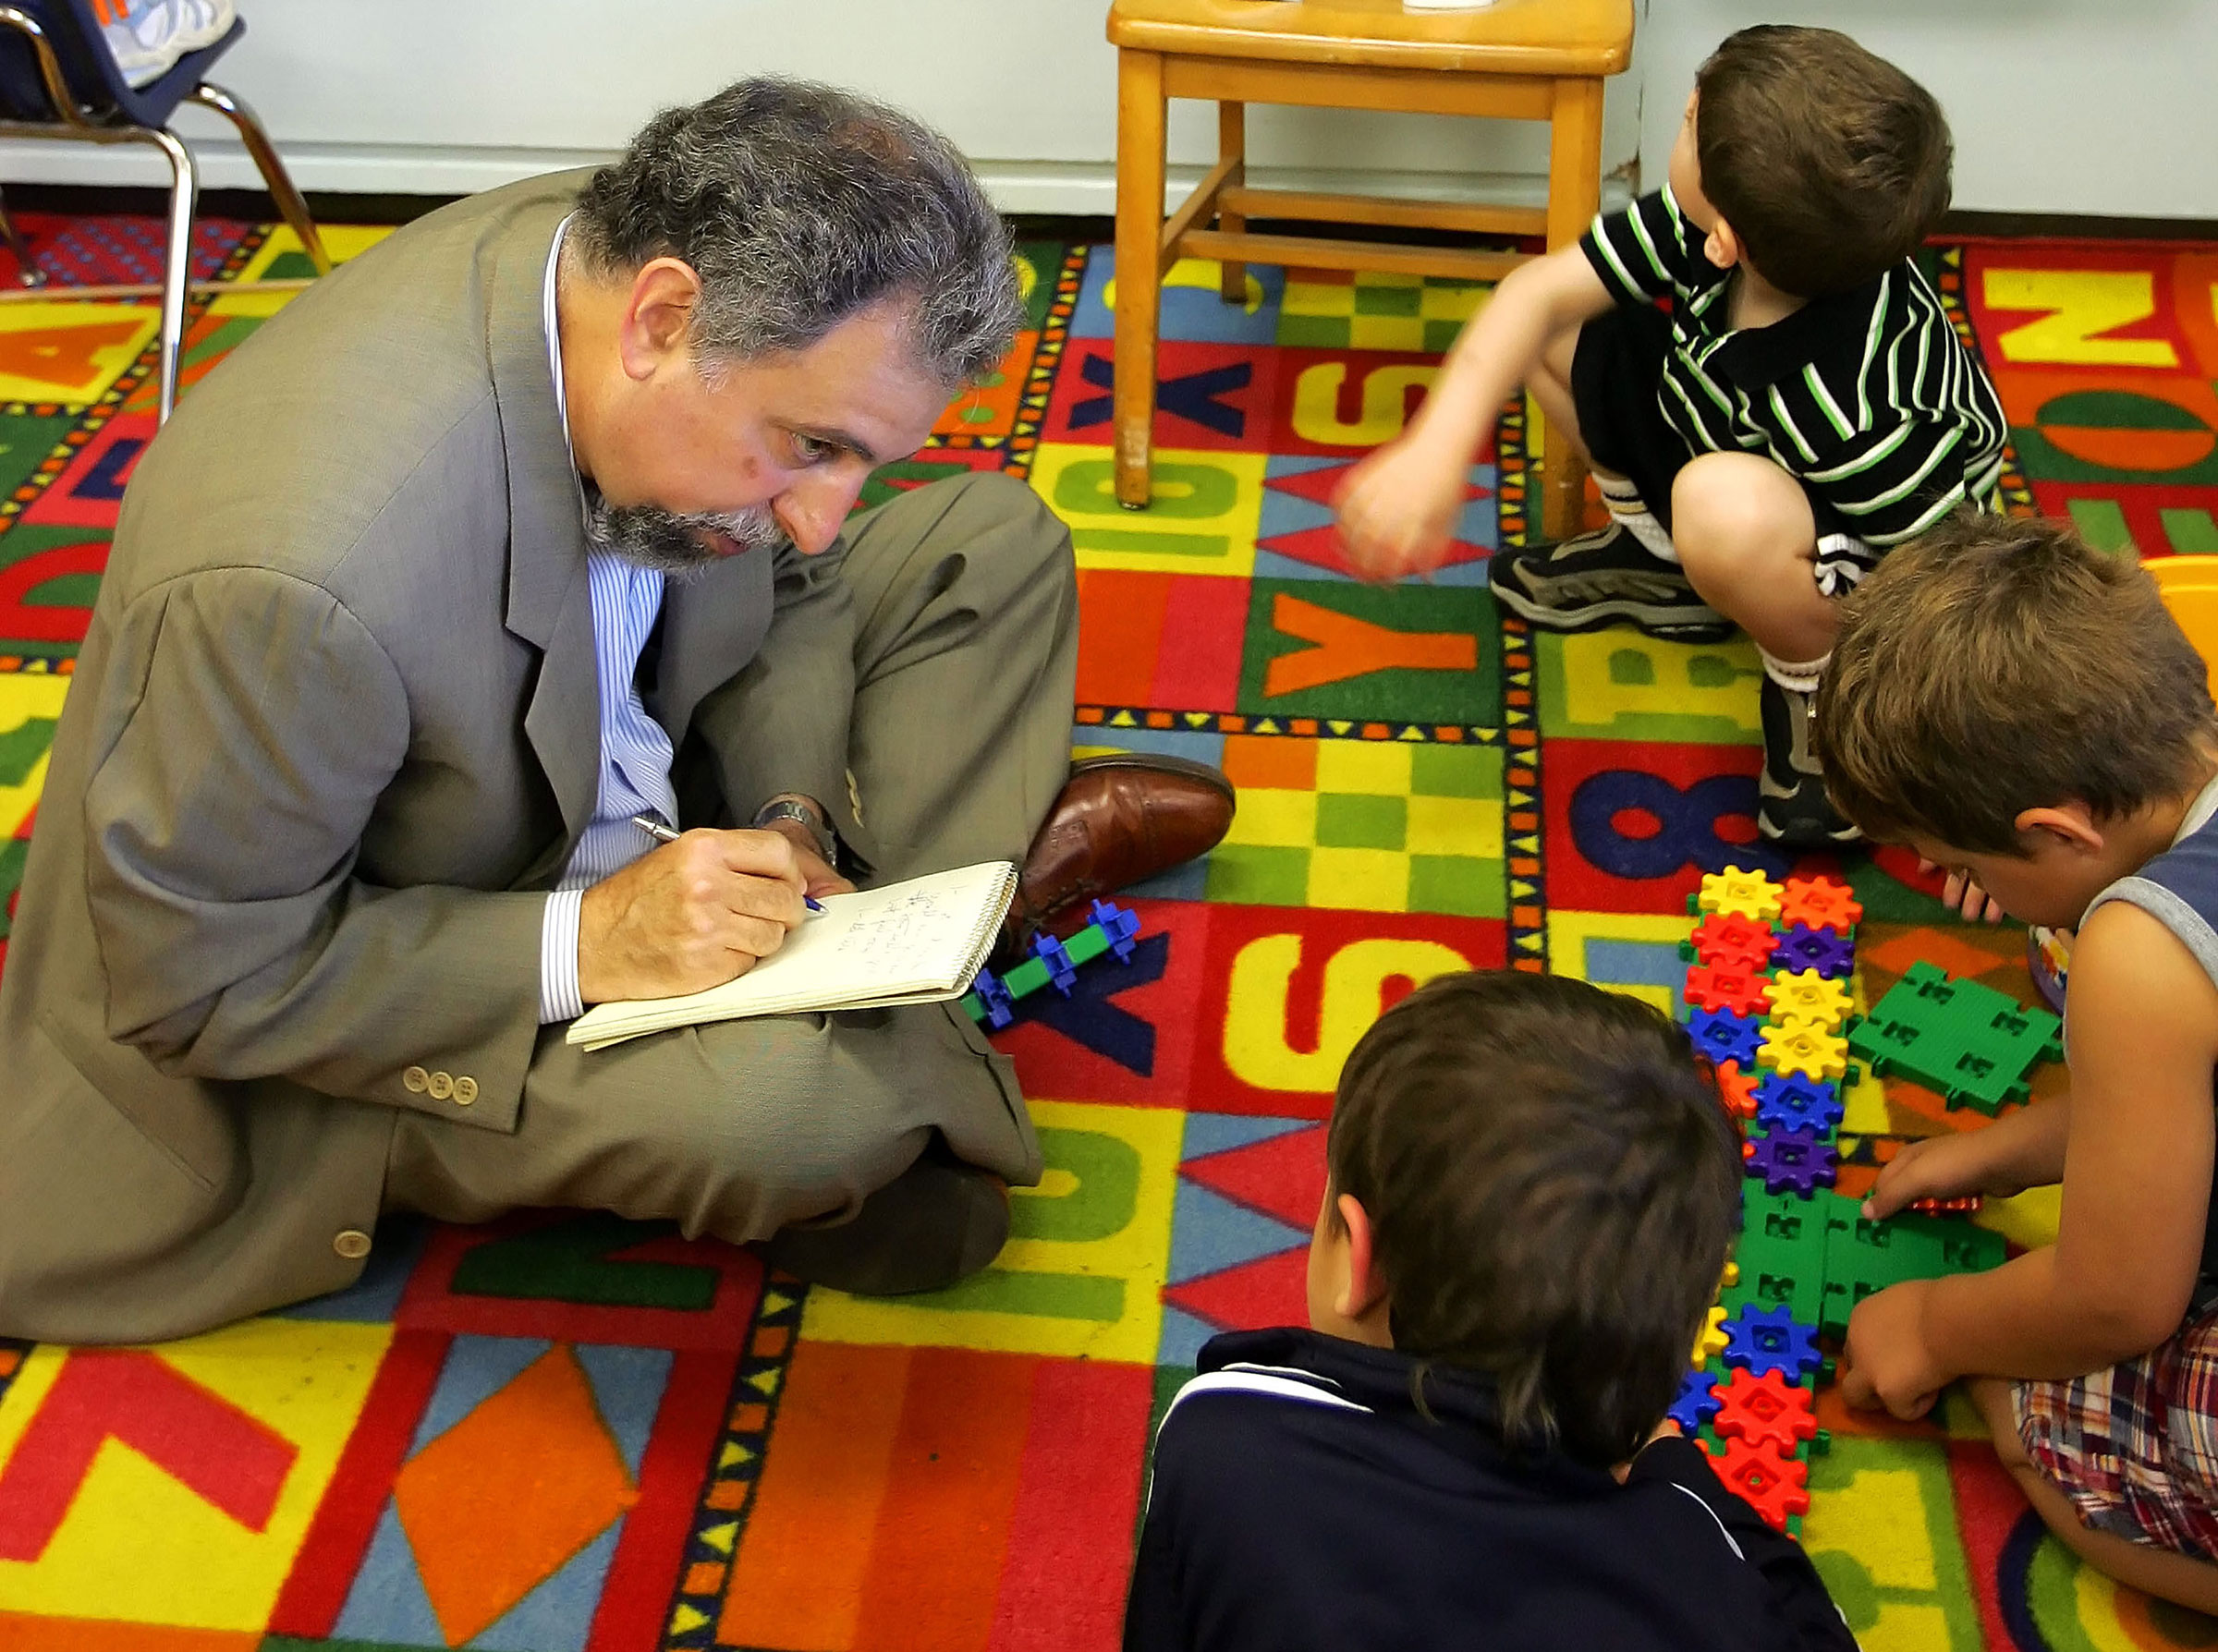 Alan Finder interviews kindergarten students at the Concord Road School in Ardsley, N.Y., on June 20, 2005. (Librado Romero—The New York Times/Redux)